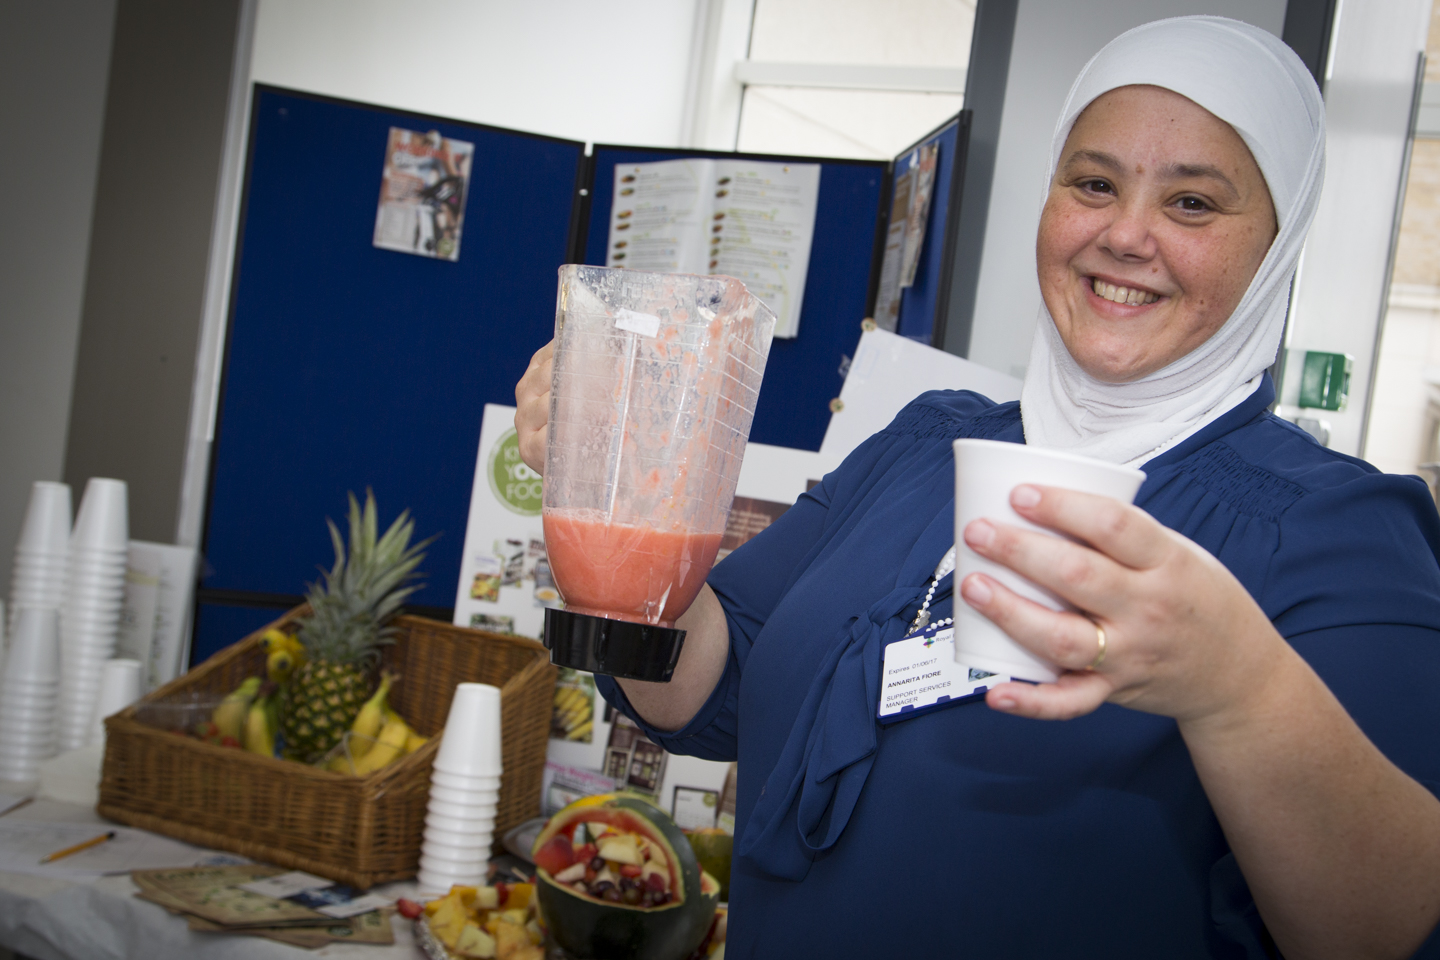 Health and wellbeing days